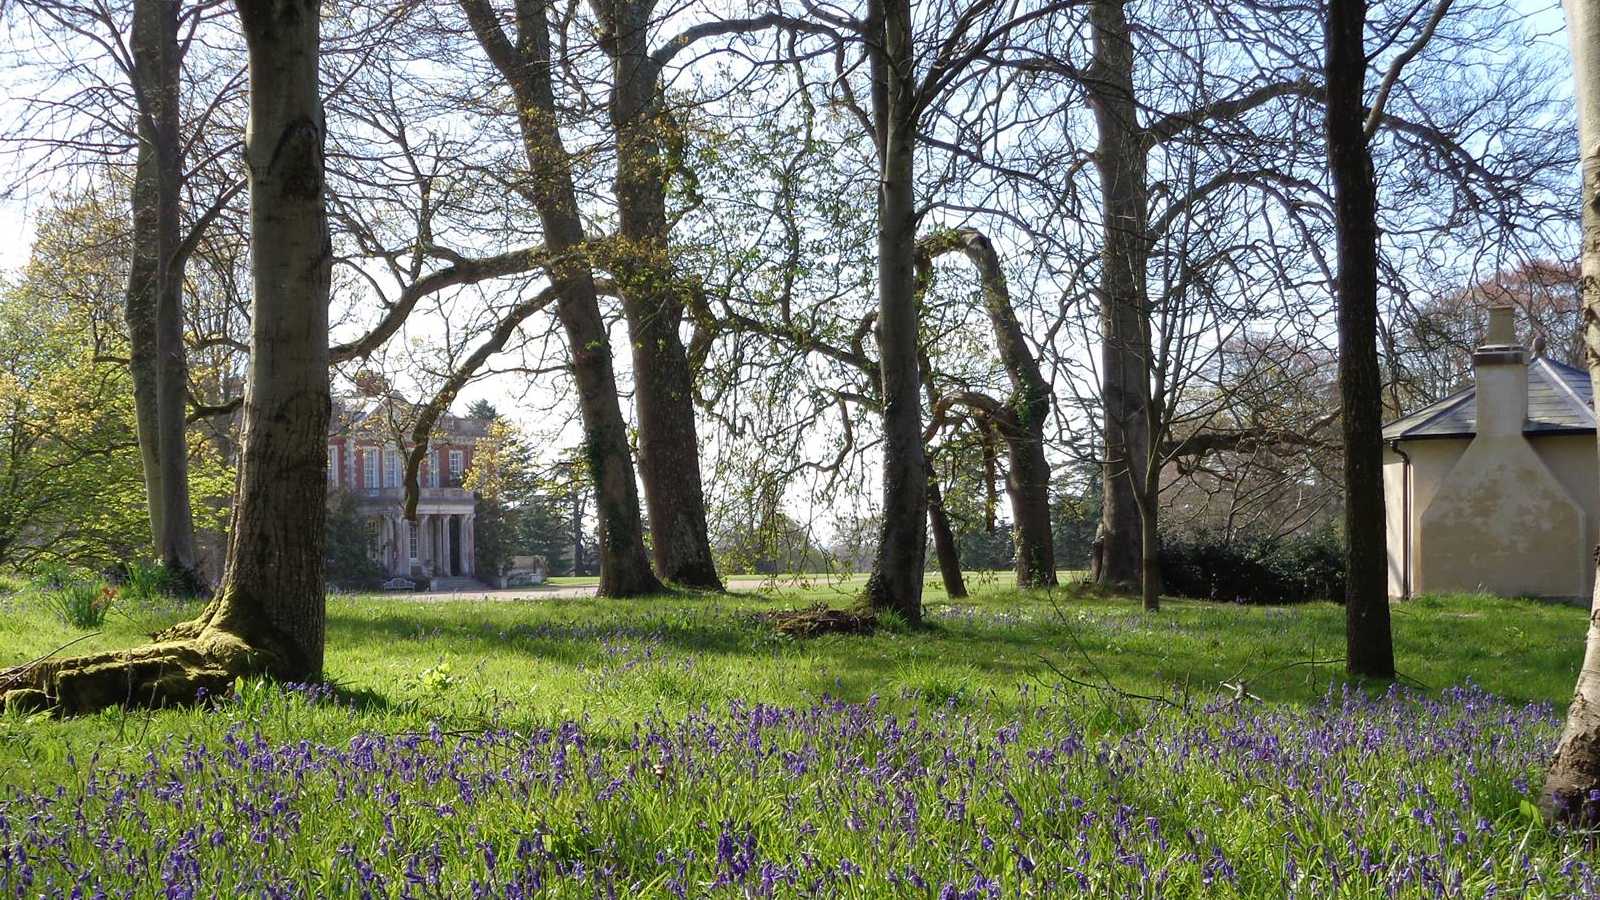 The bluebell peppered parkland of Stansted Park